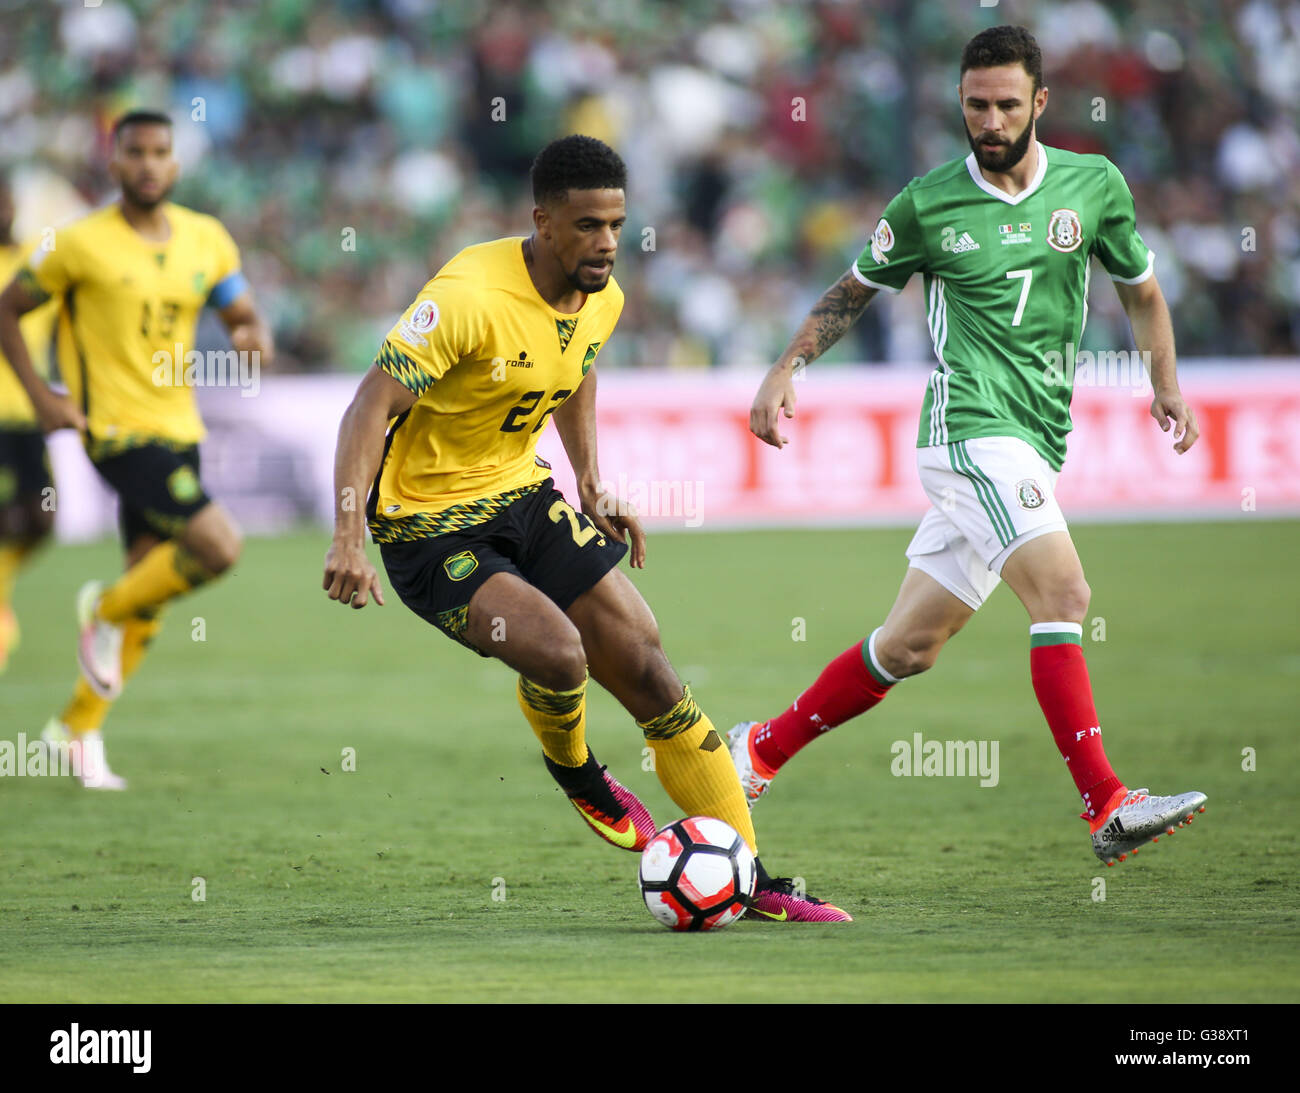 Los Angeles, California, USA. 9th June, 2016. Jamaica midfielder Garath McCleary #22 and Mexico defender Miguel Layun #7 in a Copa America soccer match between Mexico and ÃŠJamaica of Group C at the Rose Bowl in Pasadena, California, June 9, 2016. Mexico won 2-0. Credit:  Ringo Chiu/ZUMA Wire/Alamy Live News Stock Photo